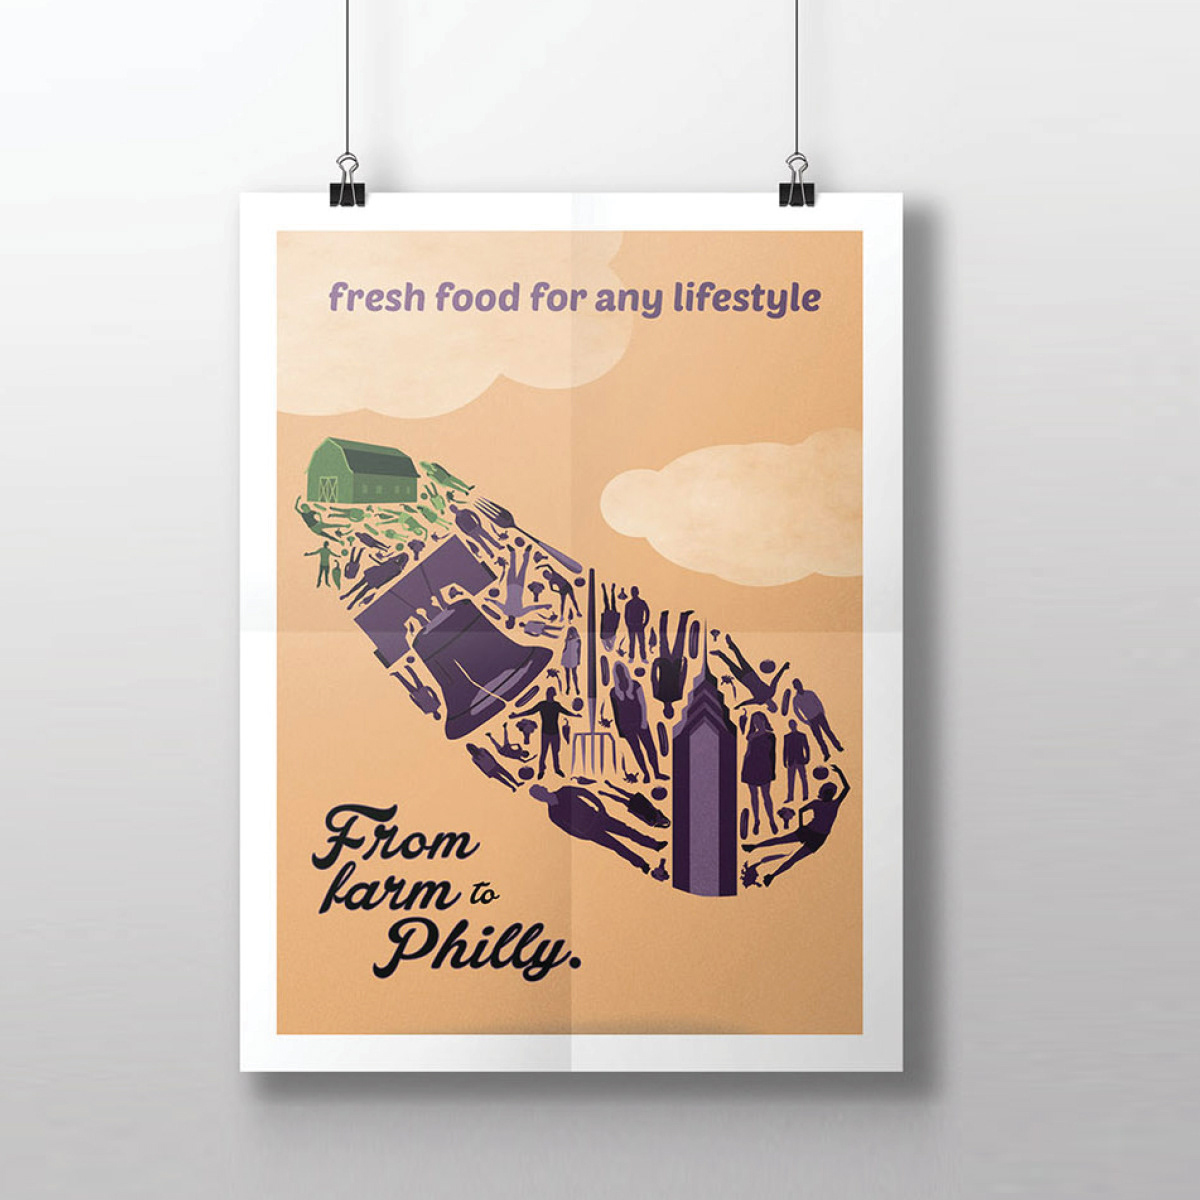 fair food farm to table ILLUSTRATION  Poster Design Advertising  campaigns Tshirt Design